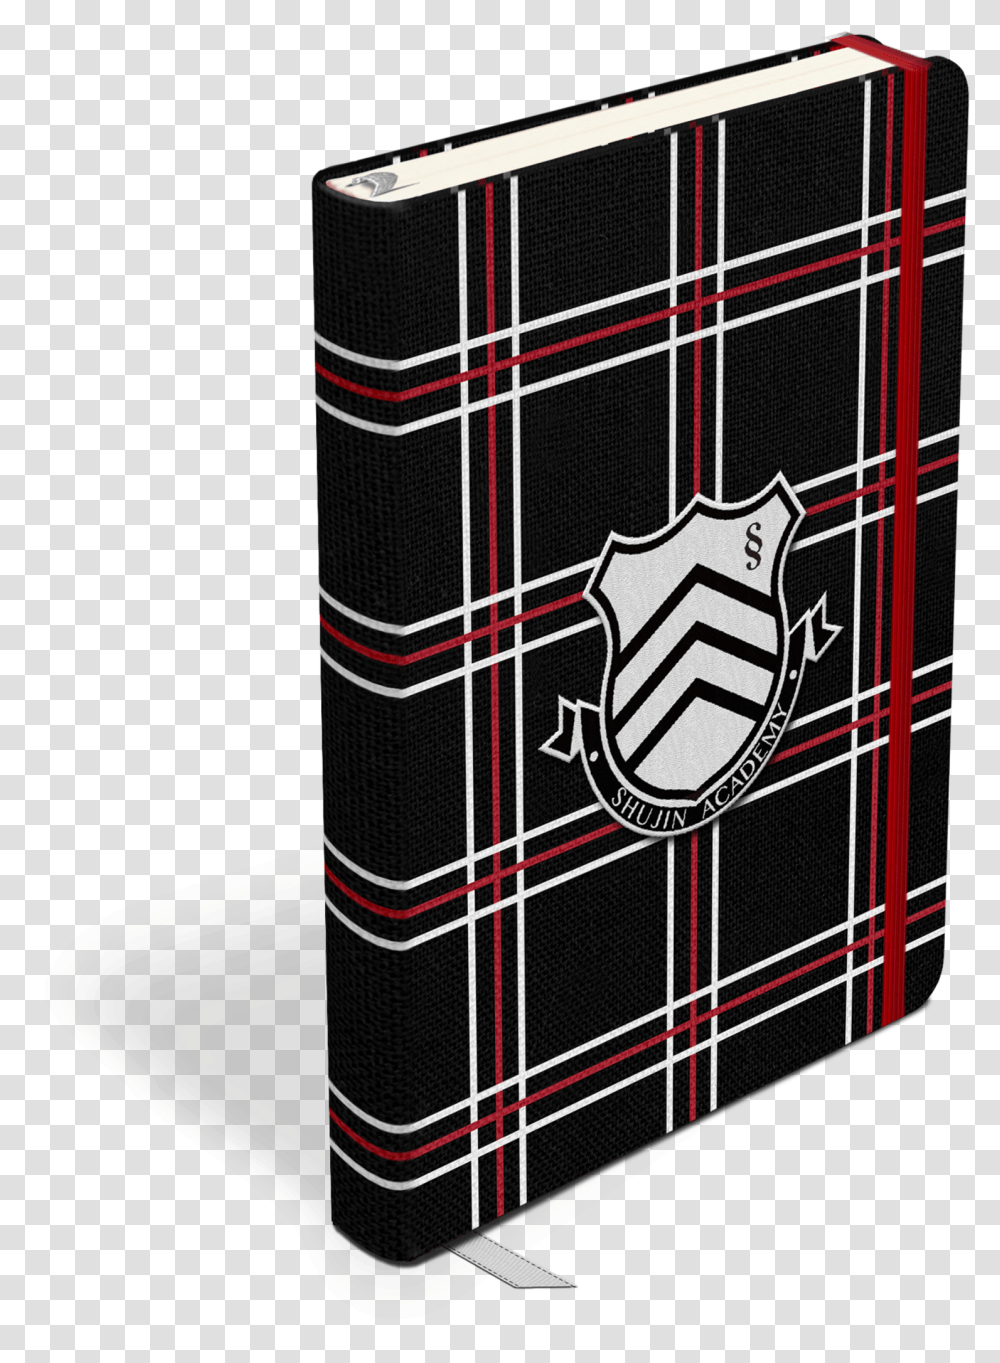 Persona 5 Notebook Filled With Concept Art Persona 5 Notebook, Clothing, Apparel, Tartan, Plaid Transparent Png